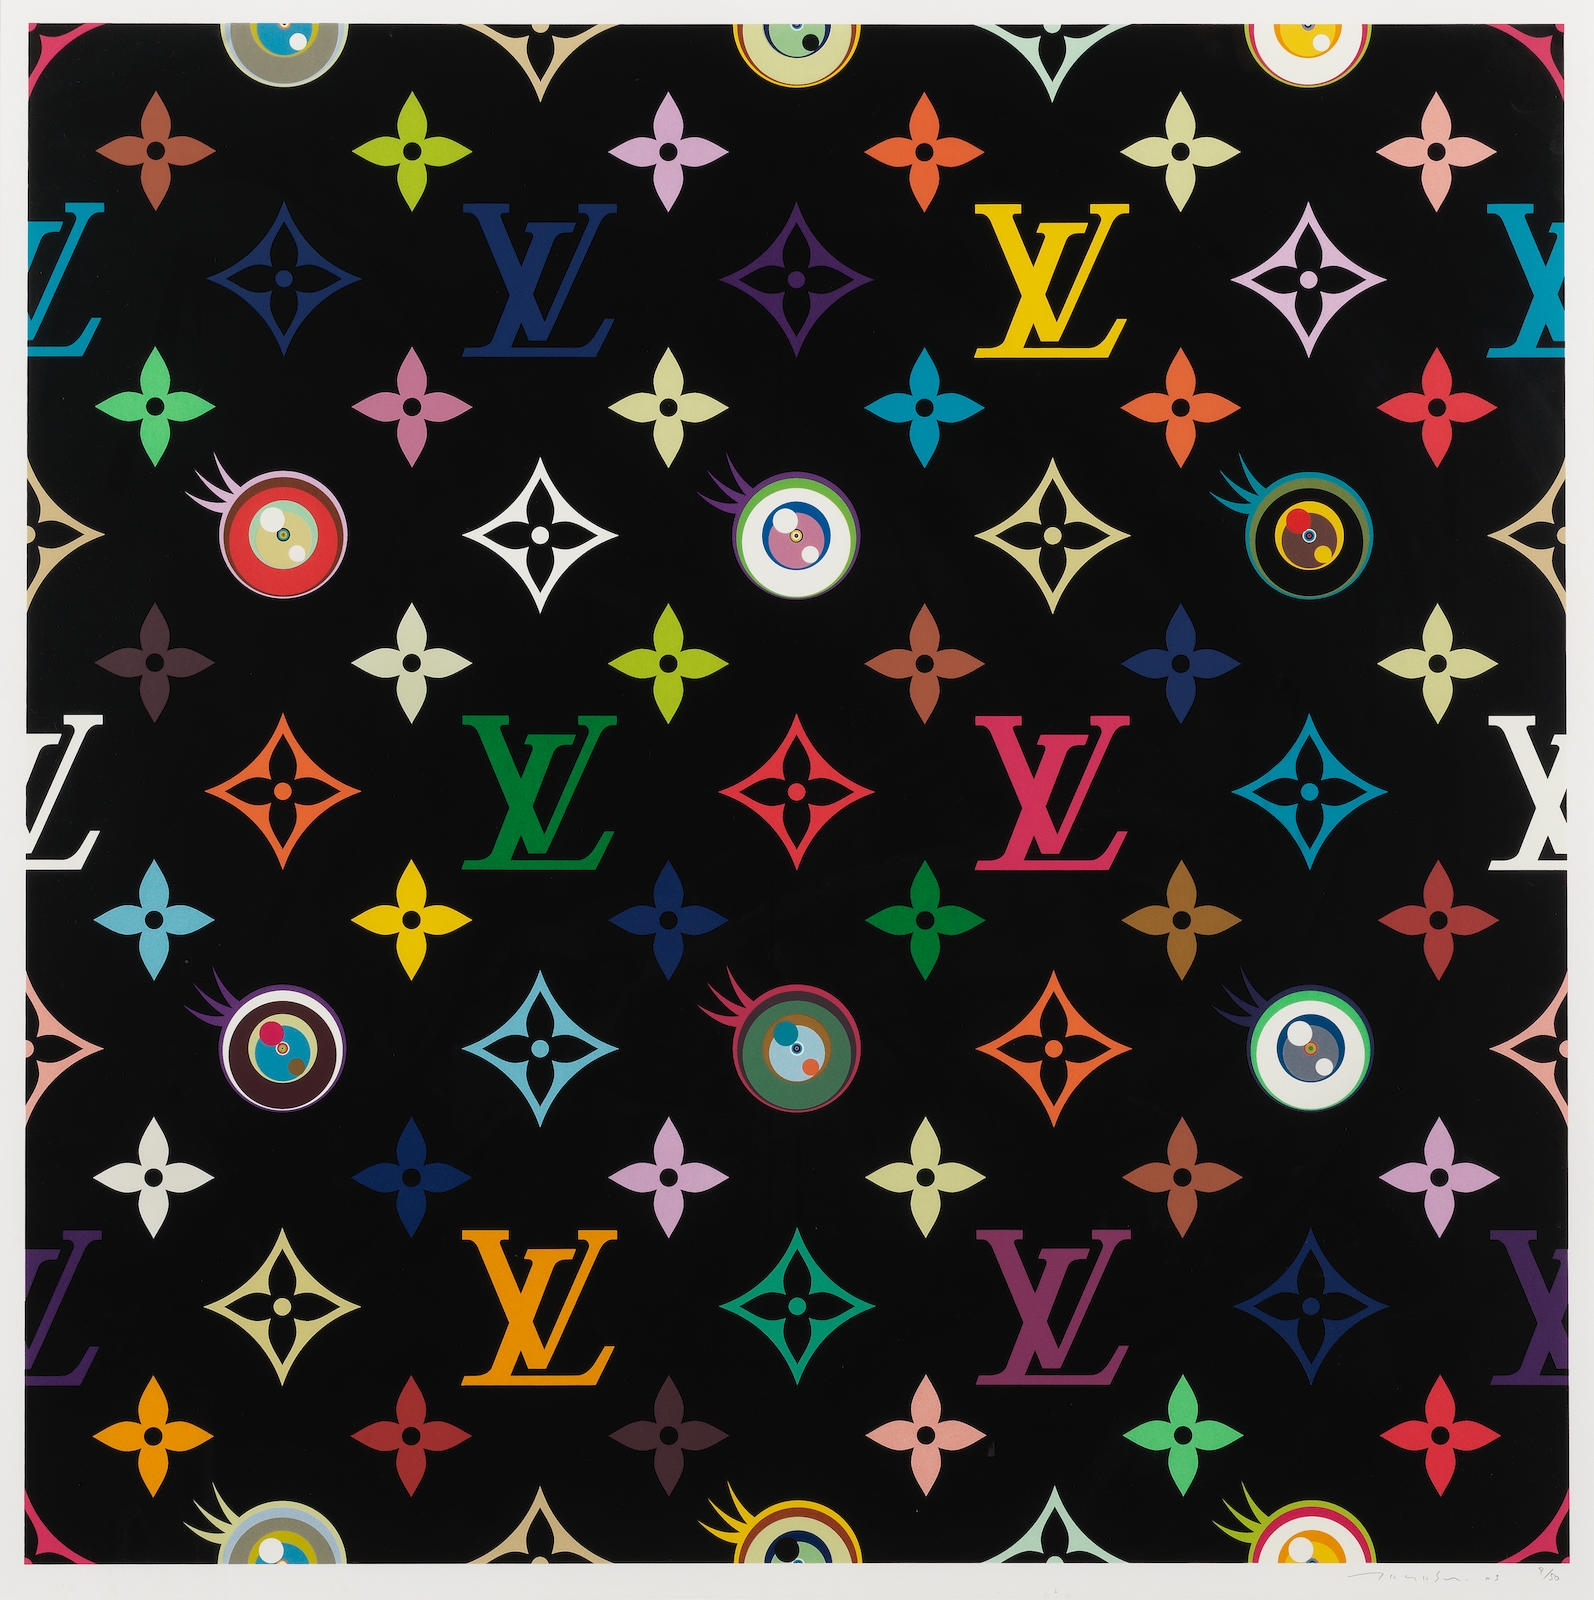 FigUl'e 4.4. Vuitton bags with Eye Love Superflat D�cor, exhi bited at